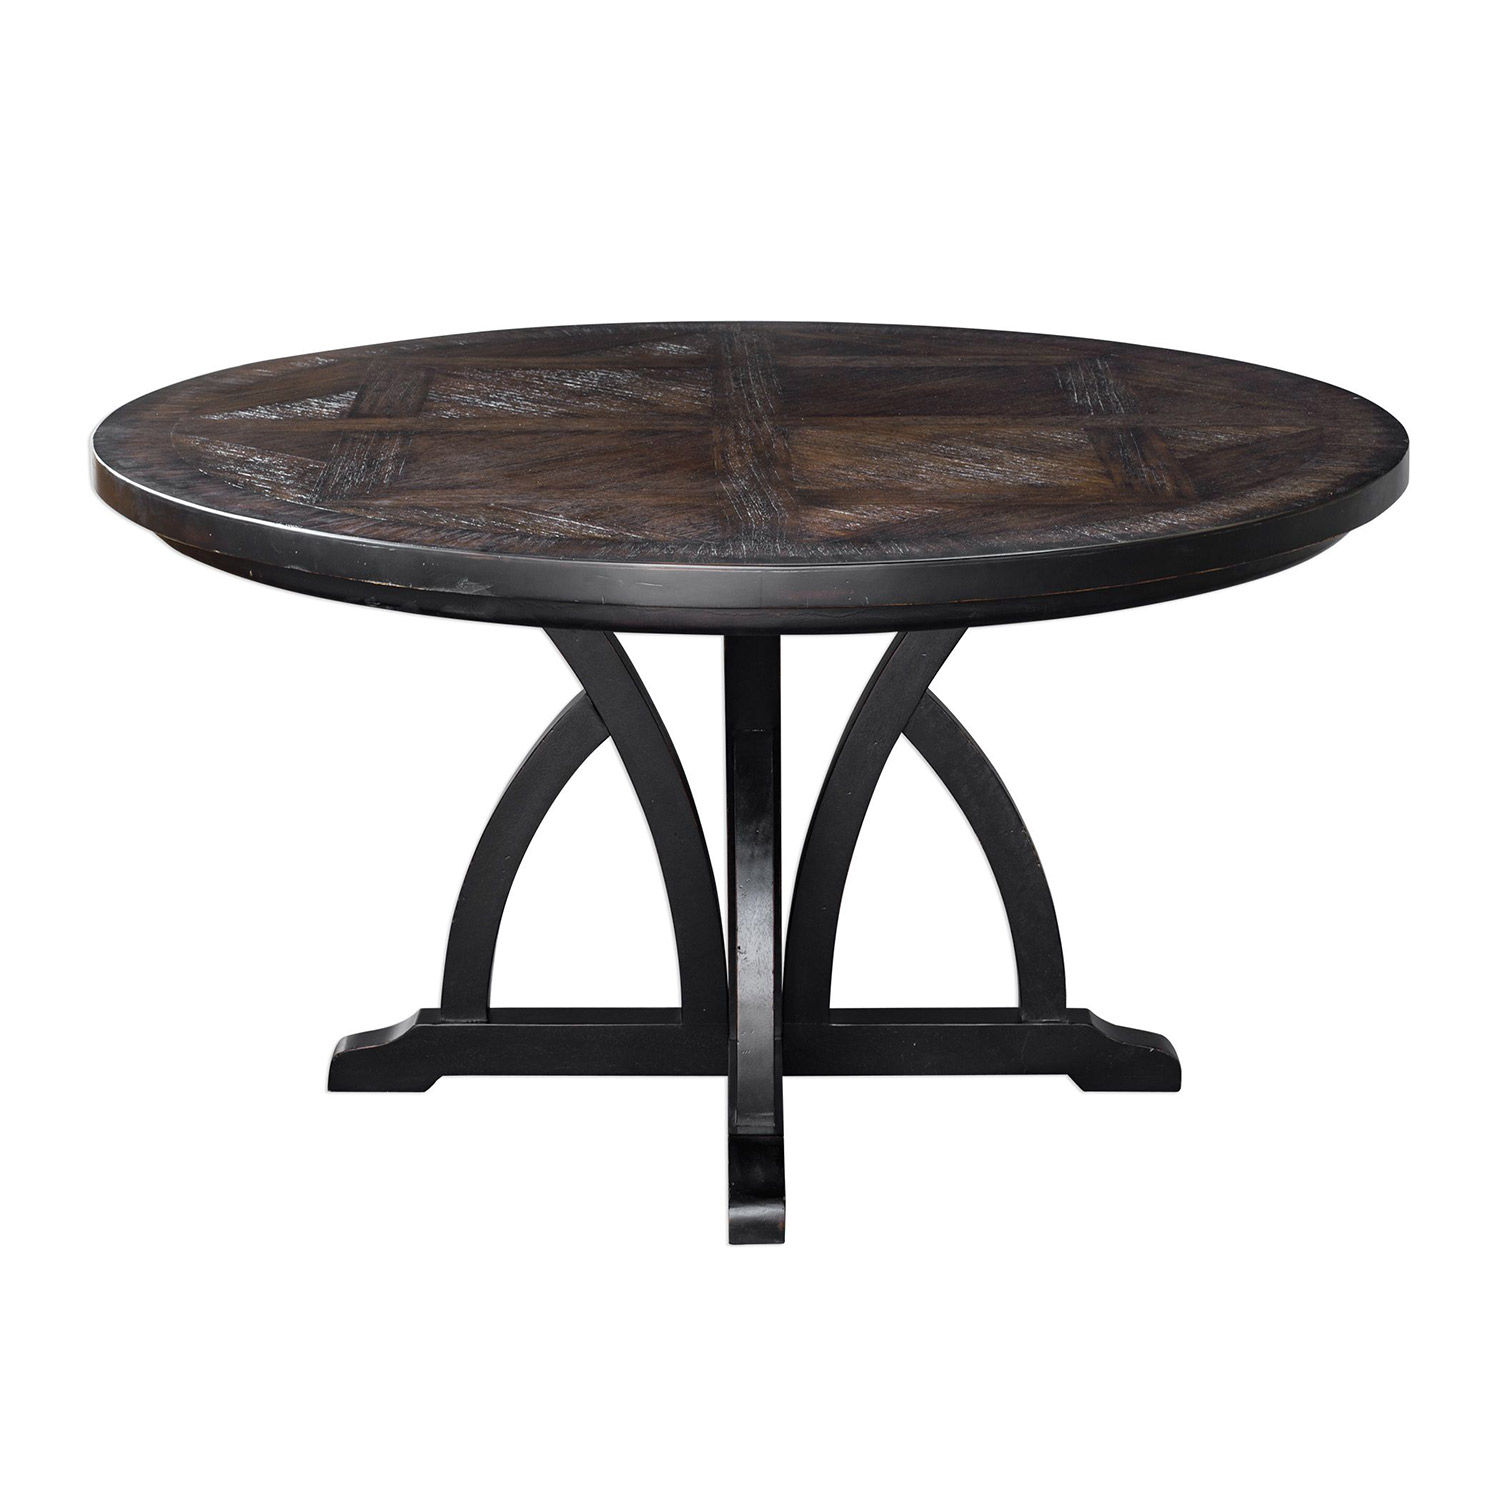 Uttermost Maiva Round Dining Table - Black